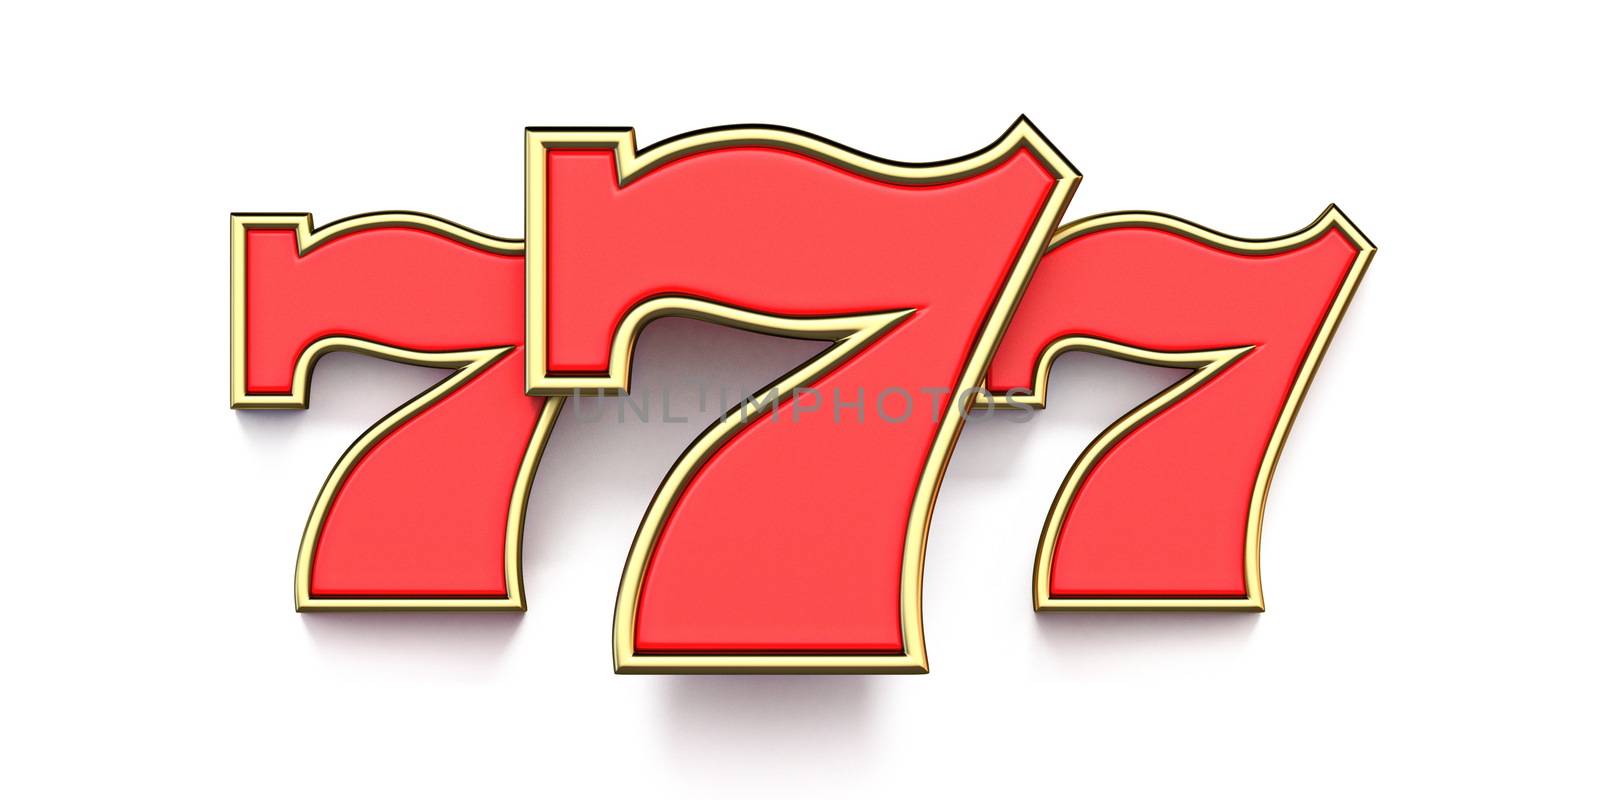 777 casino sign 3D by djmilic